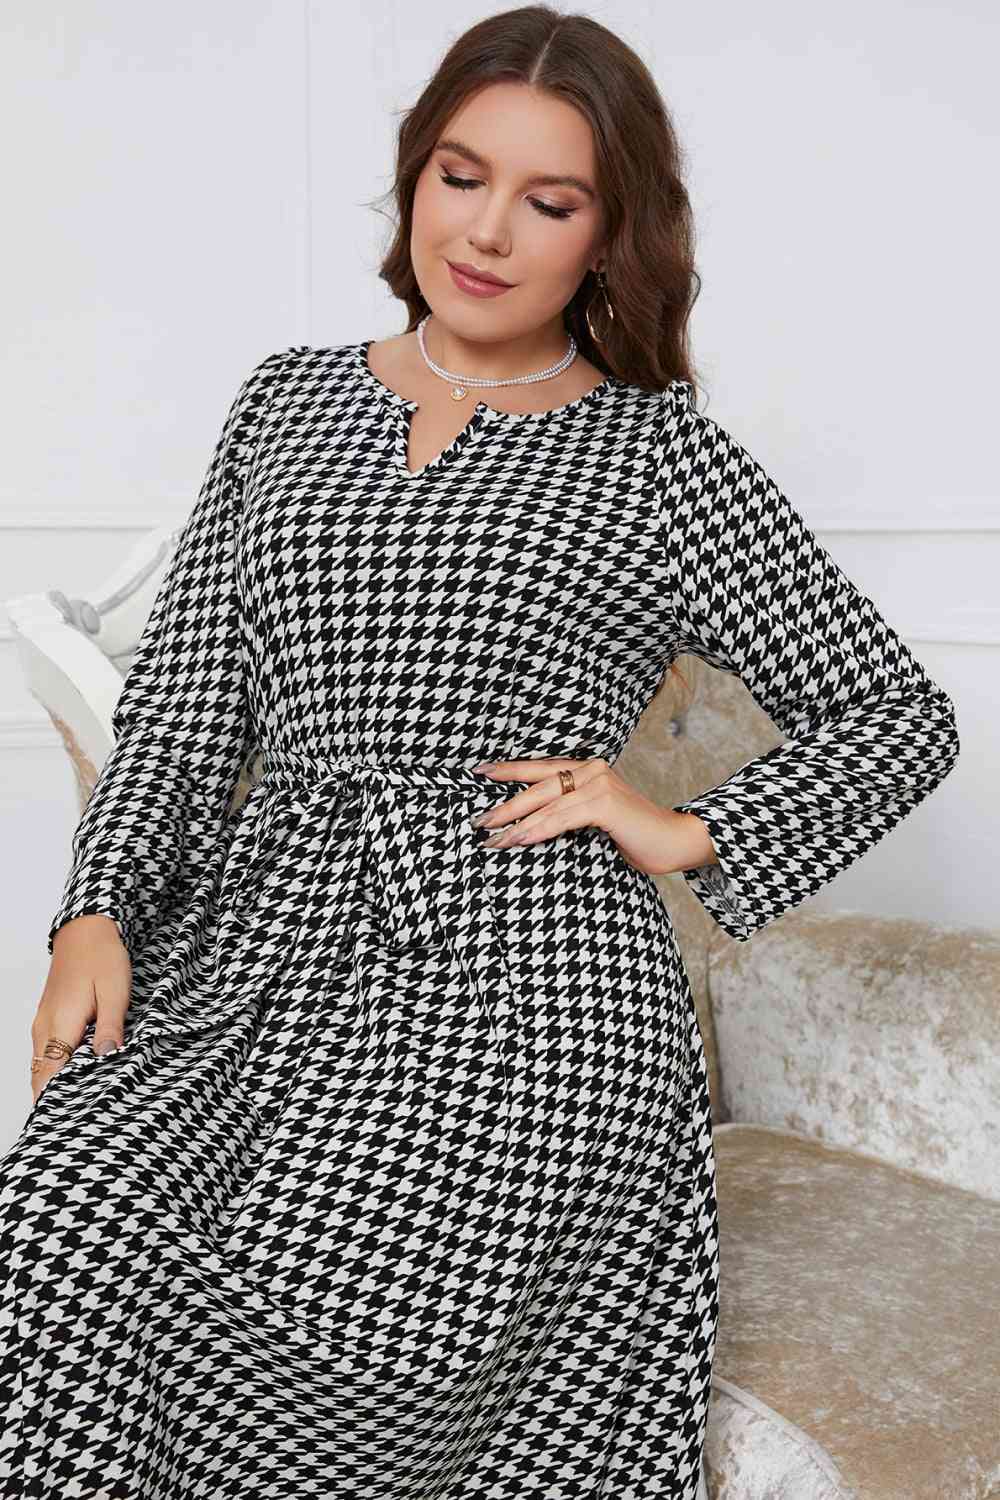 Melo Apparel Plus Size Notched Neck Houndstooth Tie Belt Maxi Dress